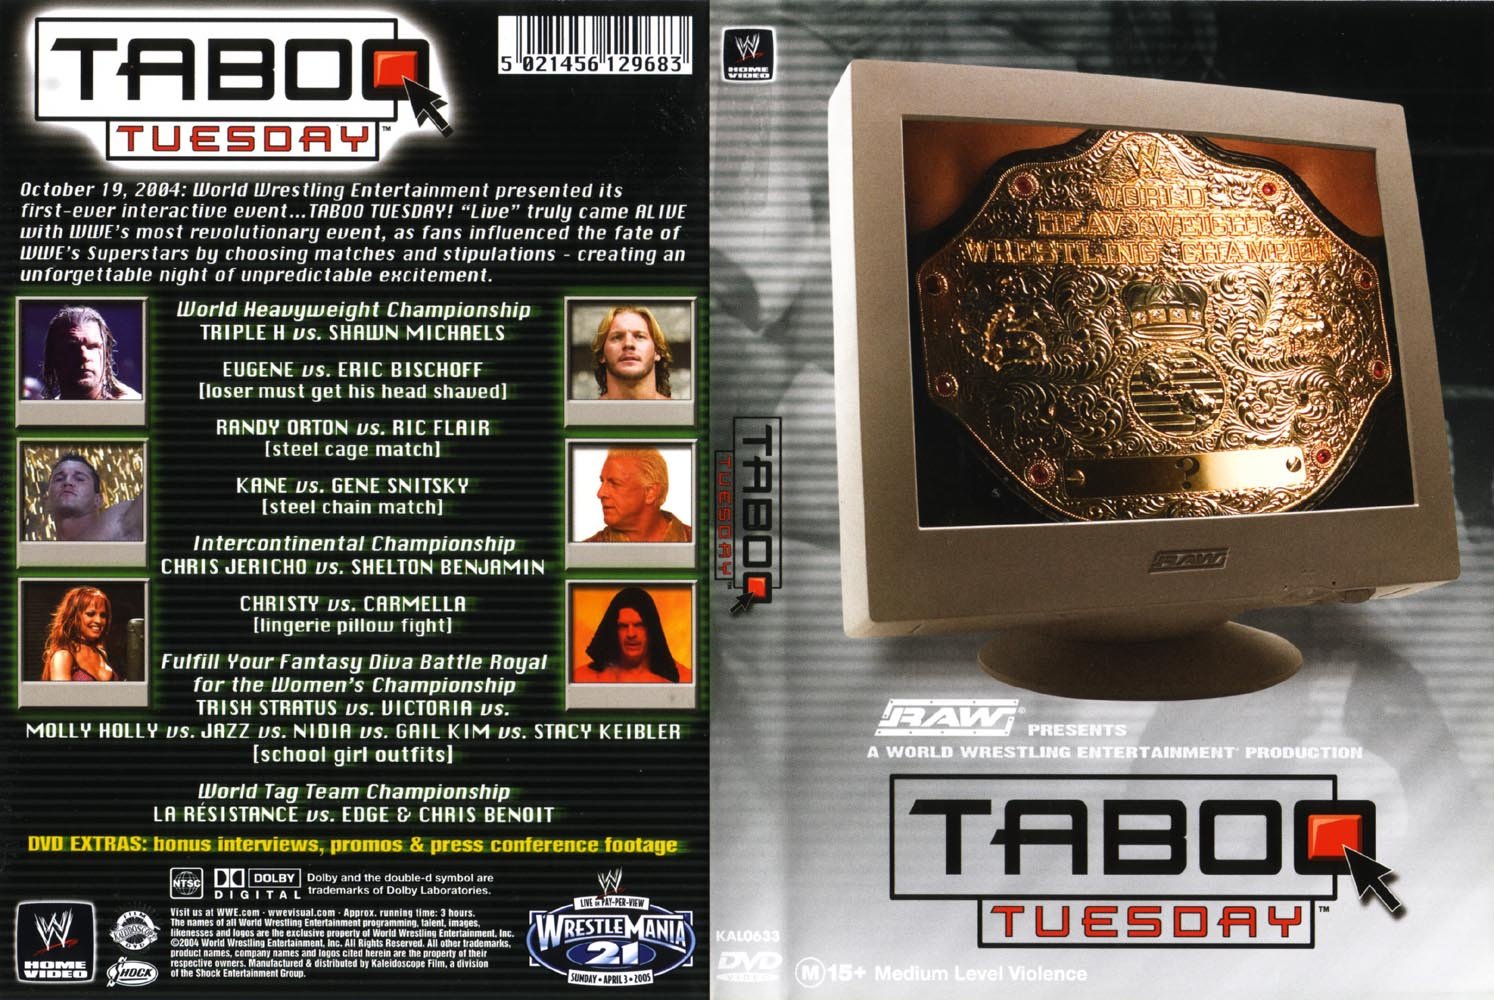 Jaquette DVD WWE Taboo Tuesday 2004